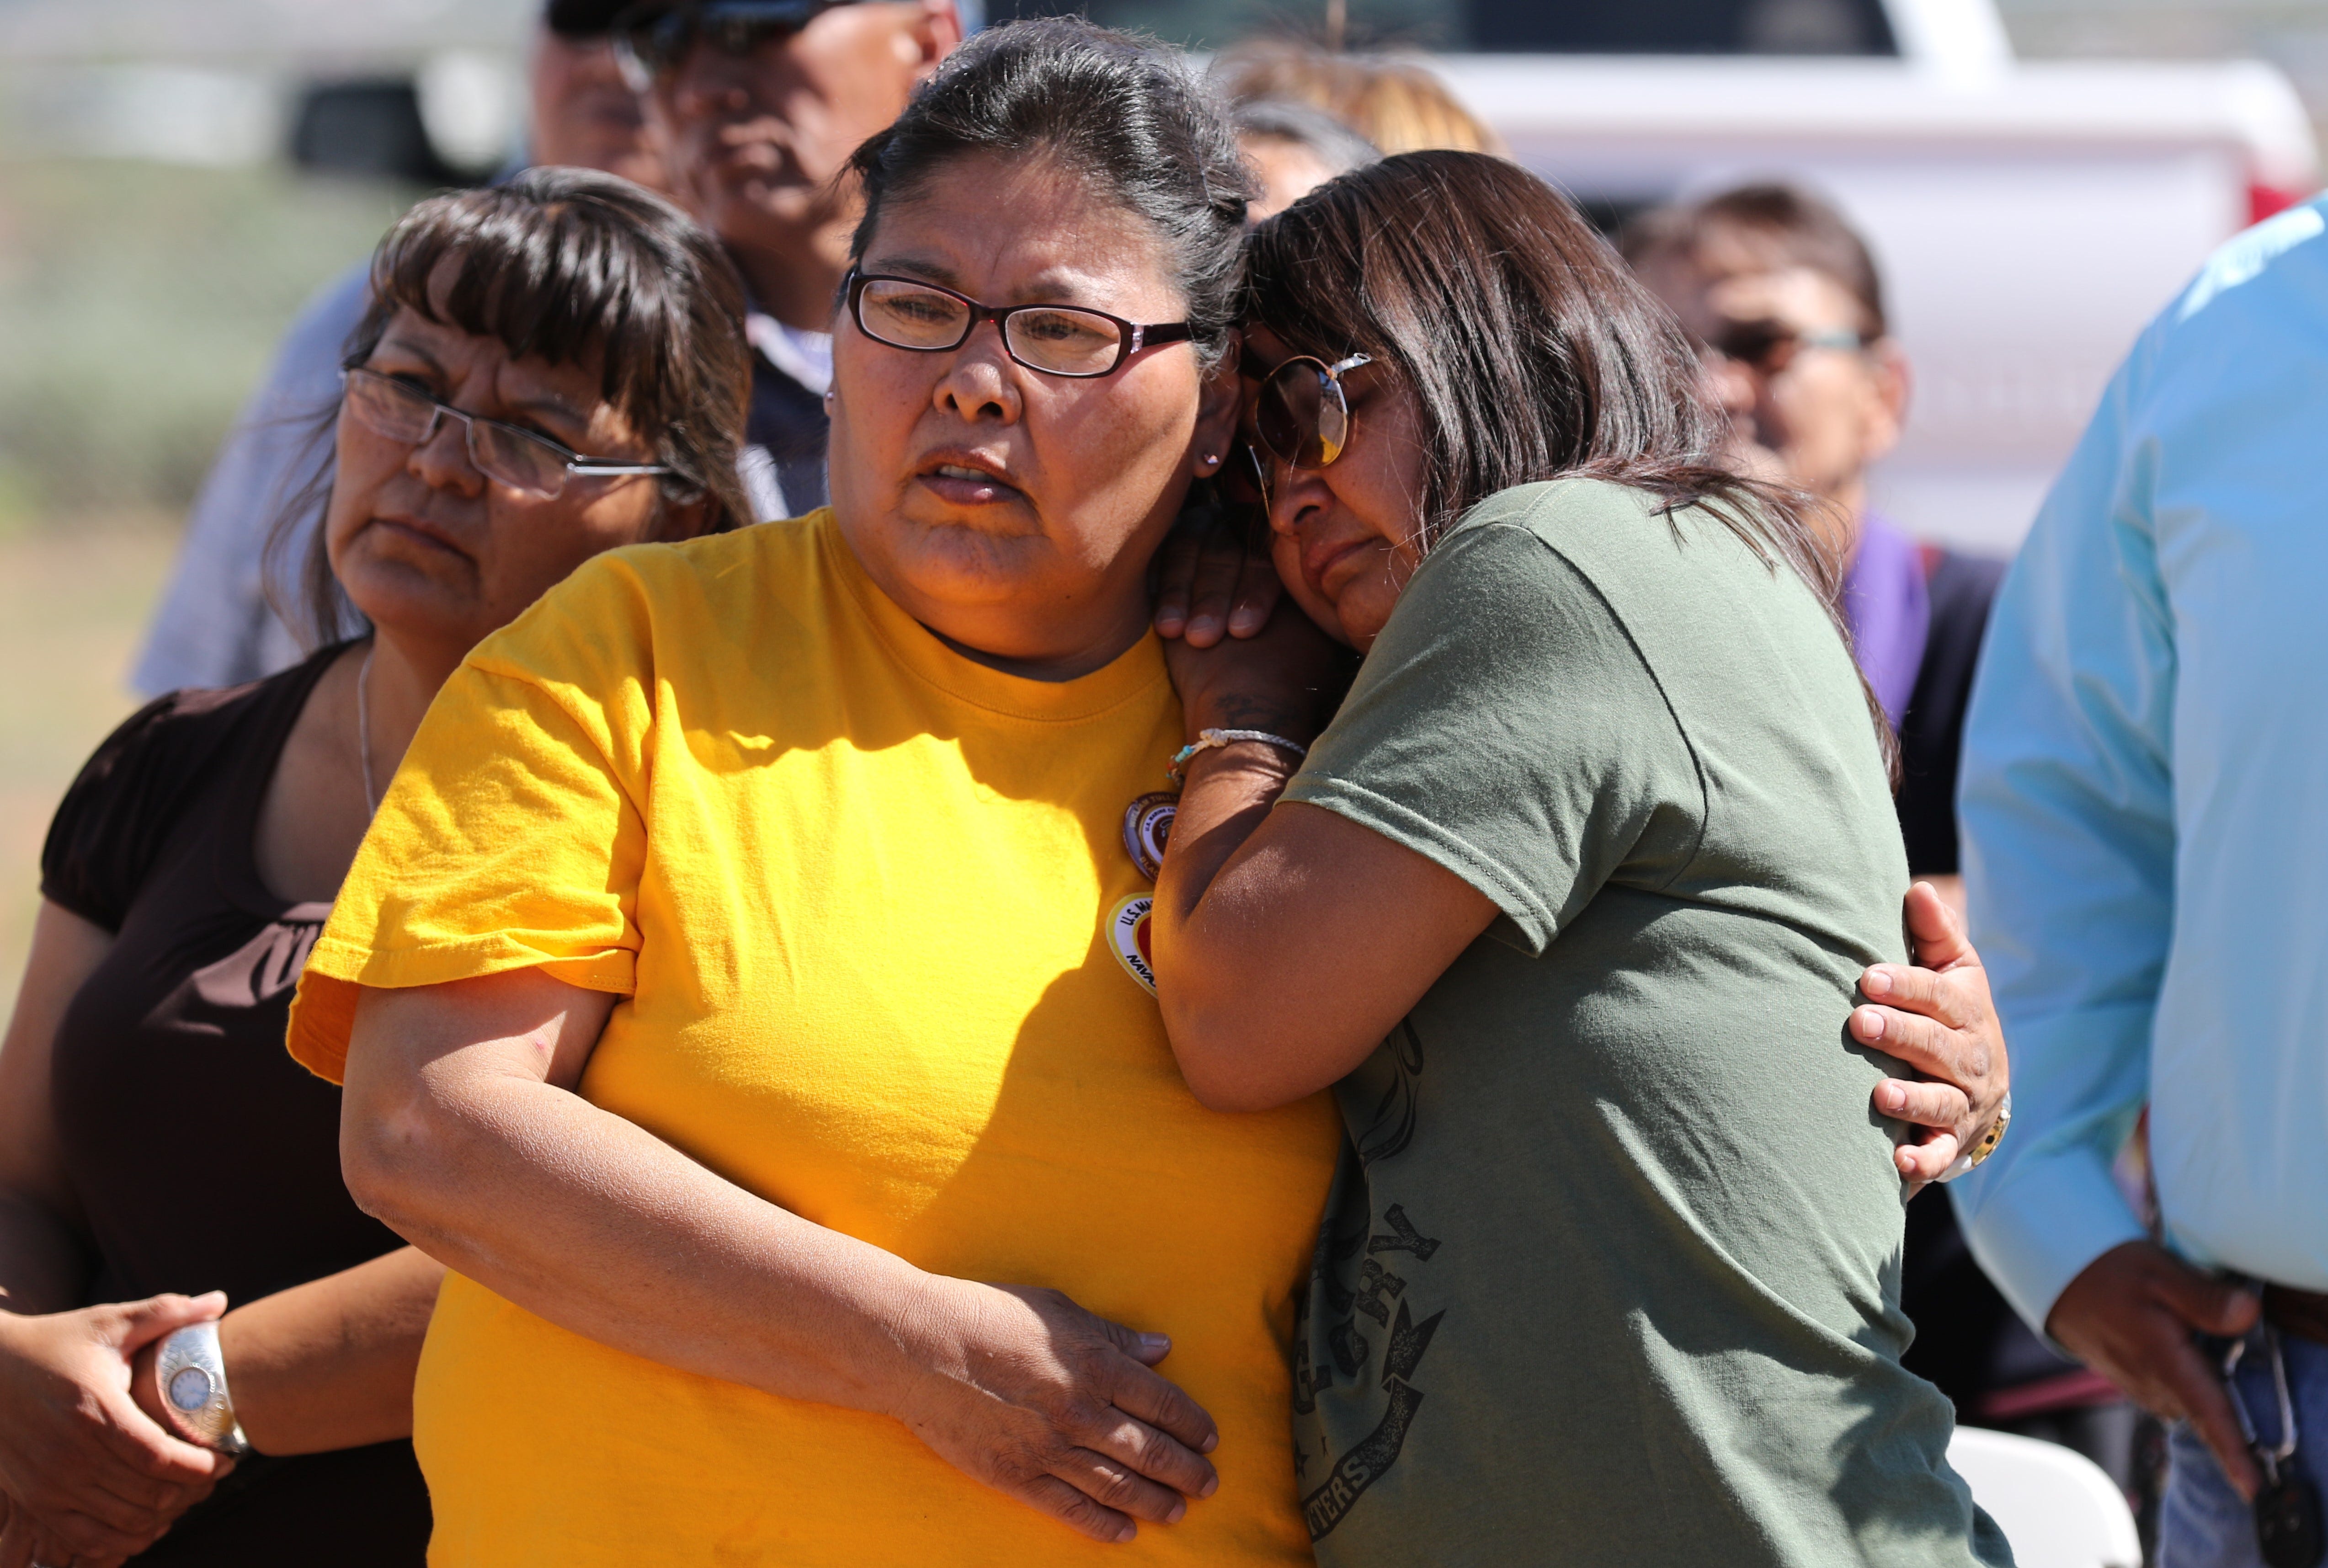 Pauline Francis, left, comforts Raquel Brown during a memorial service for Navajo Code Talker William Tully Brown Sr. on June 6 at the Fort Defiance Veterans Cemetery in Fort Defiance, Ariz. Raquel is one of Brown's daughters.